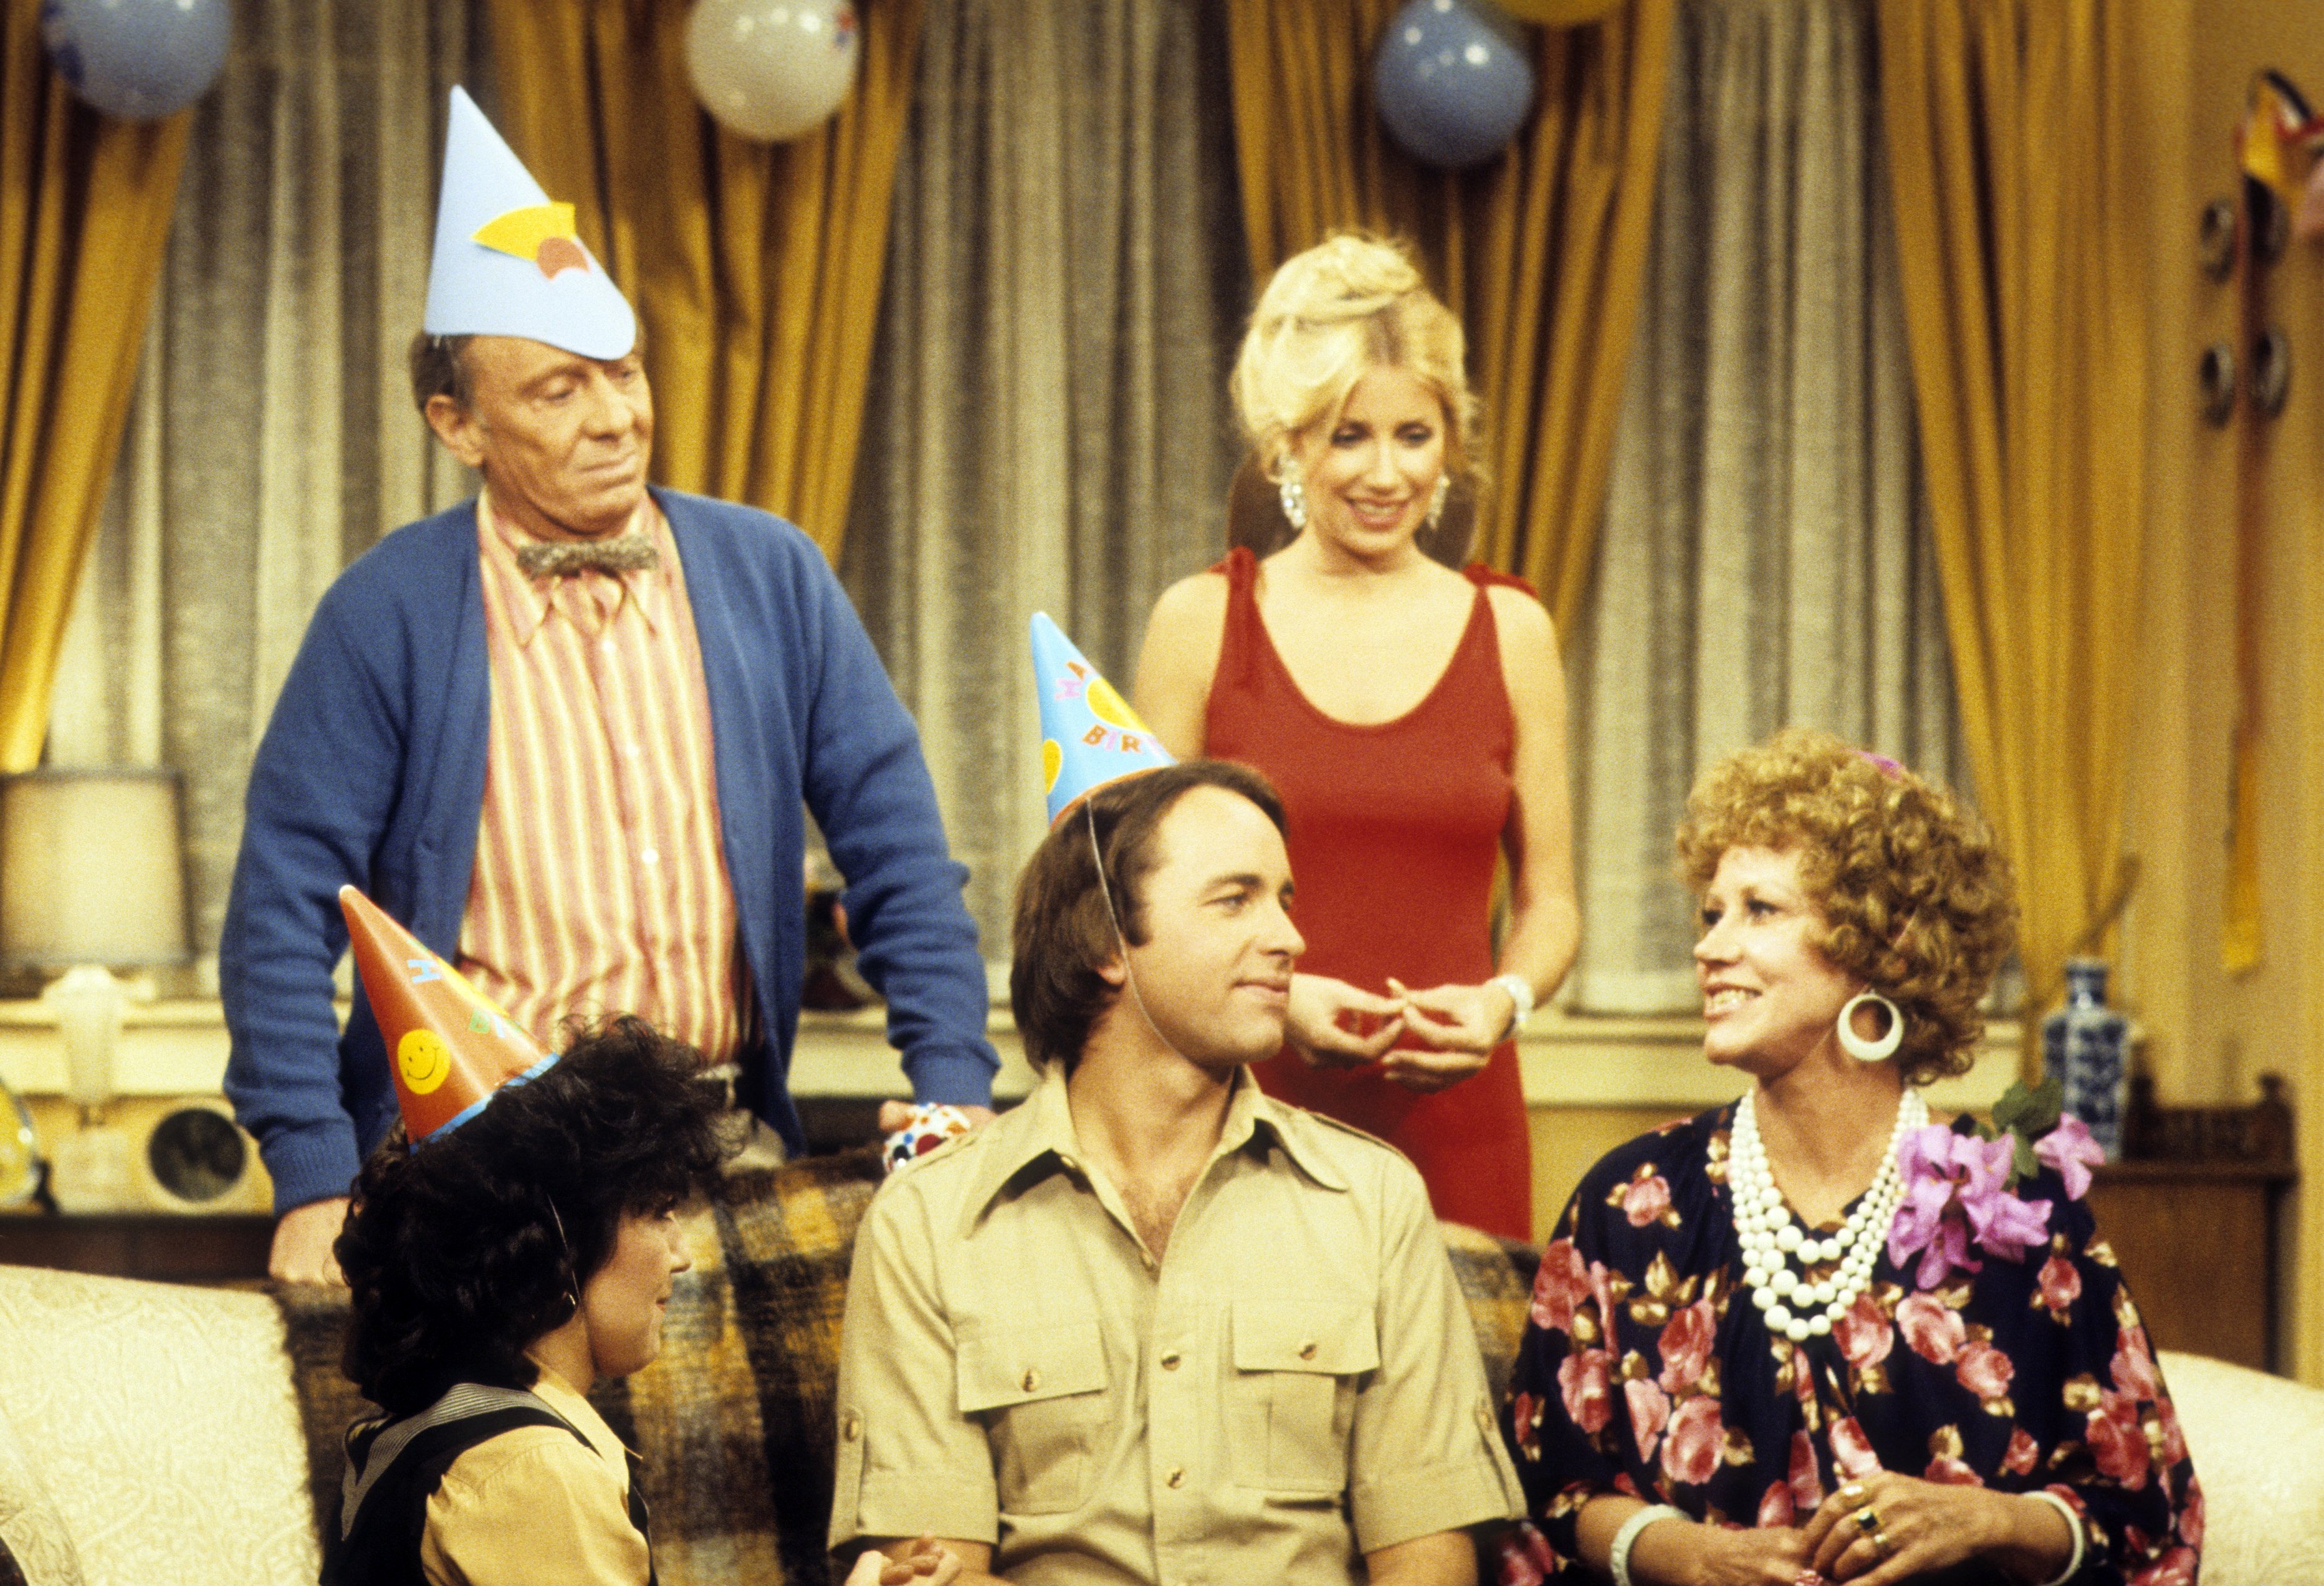 Still of John Ritter, Norman Fell, Suzanne Somers, Joyce DeWitt and Audra Lindley in Three's Company (1977)